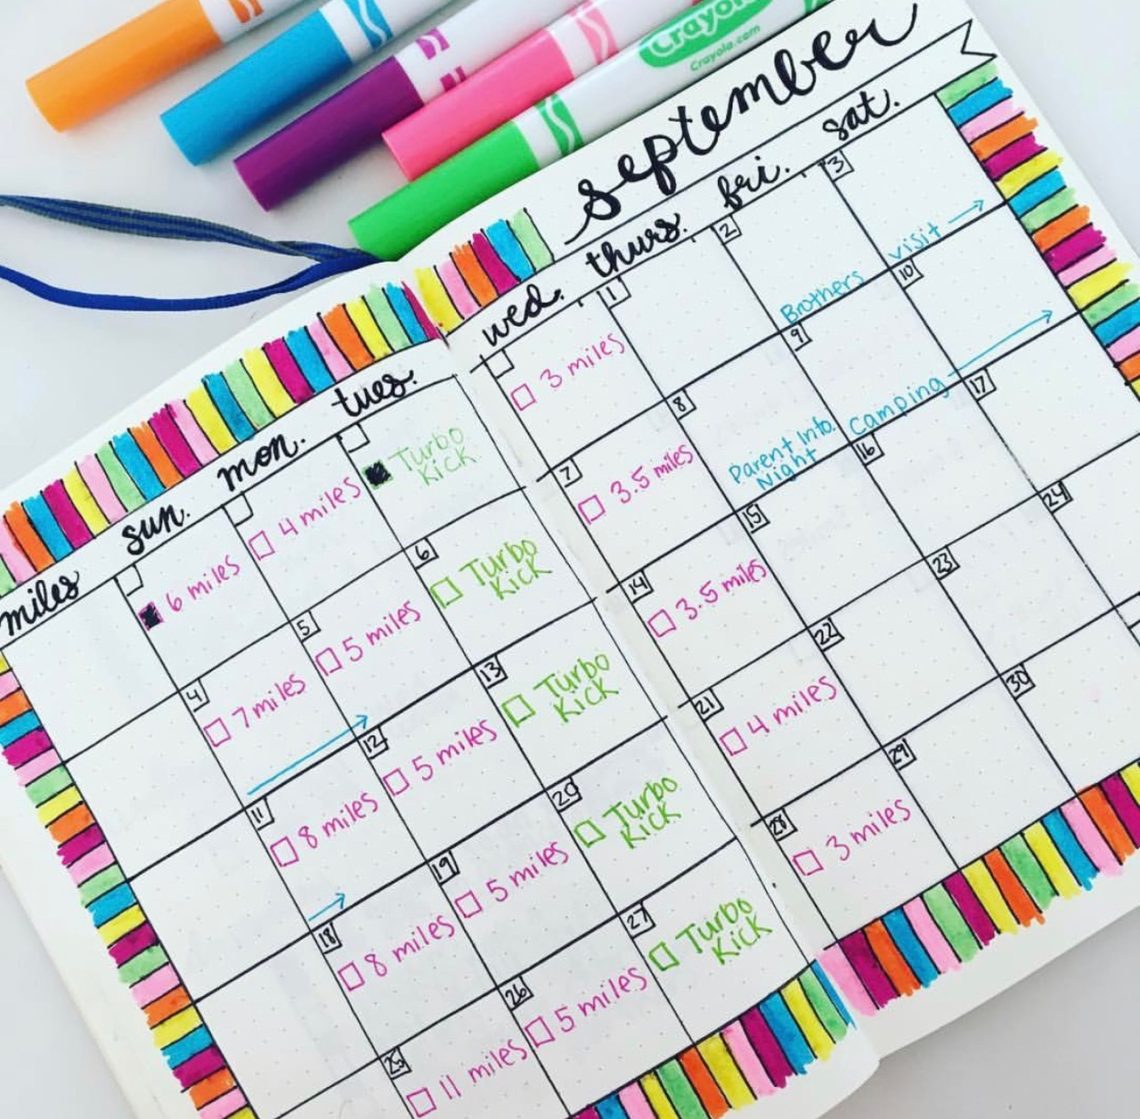 5 Ways to Use Your Bullet Journal to Eat Healthier